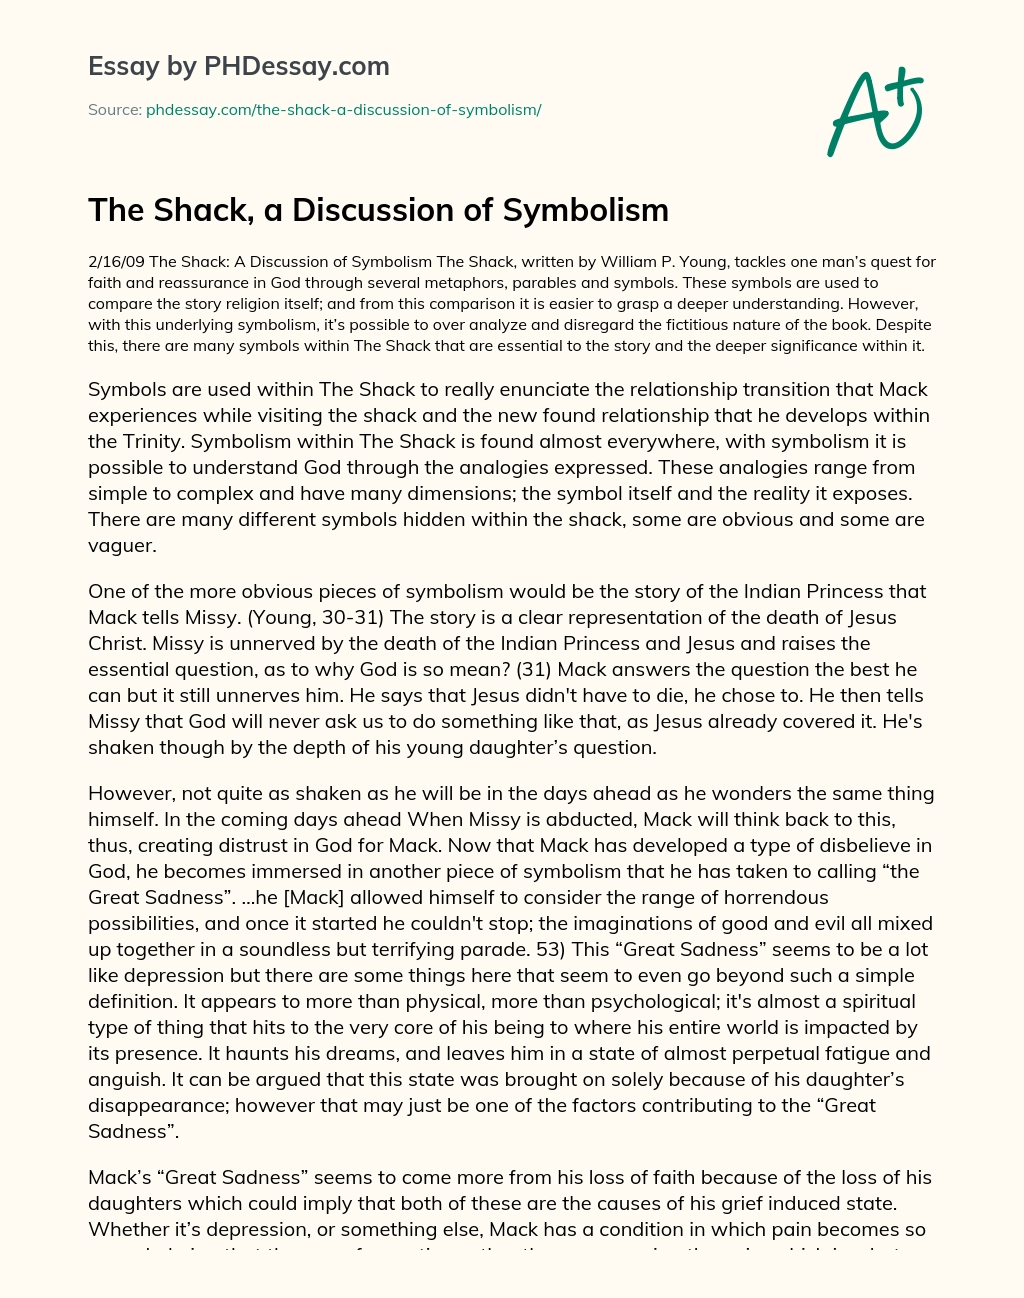 The Shack, a Discussion of Symbolism essay